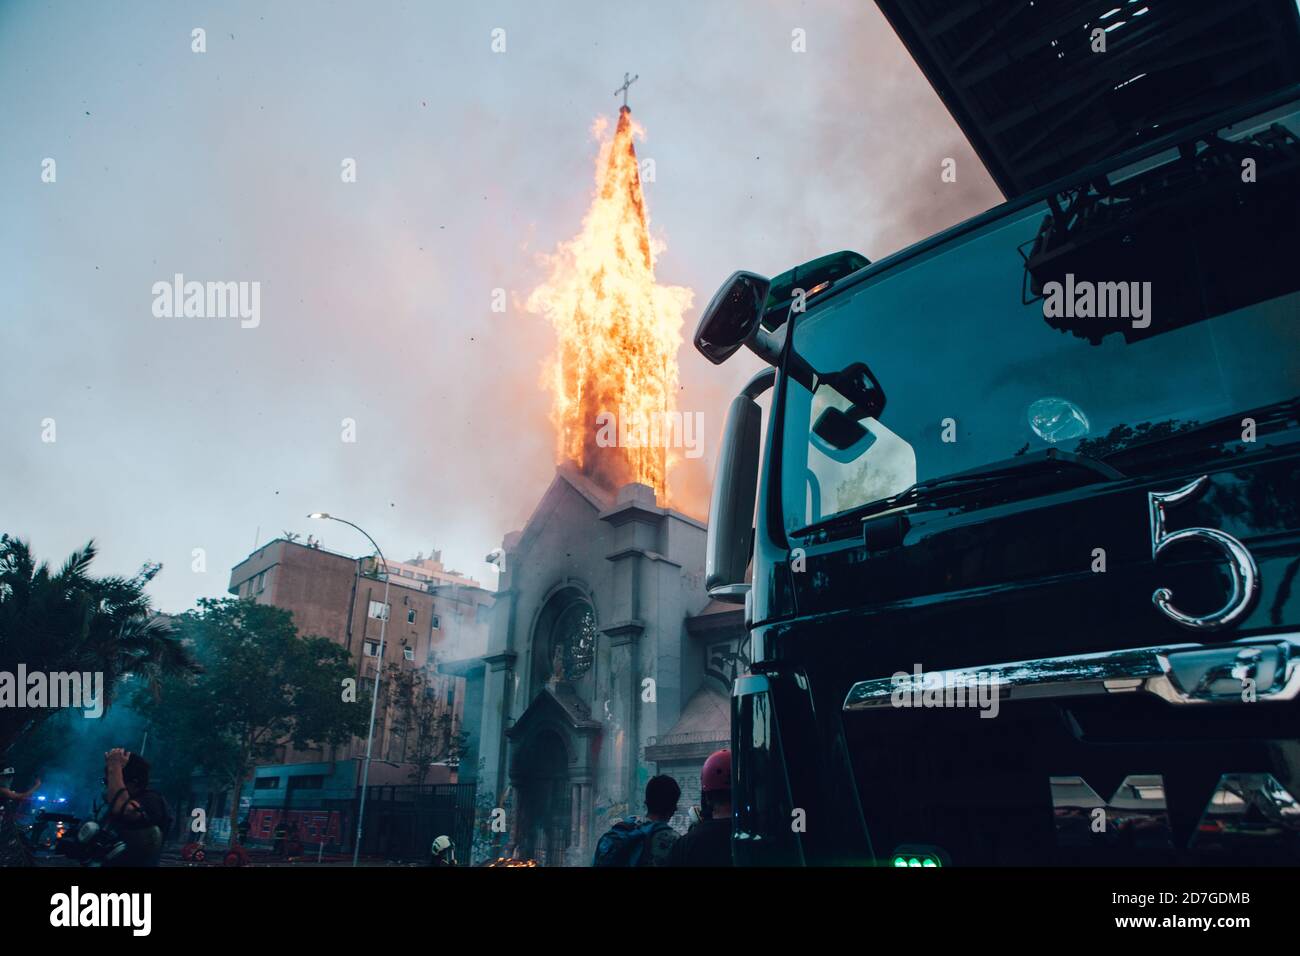 SANTIAGO, CHILE-OCTOBER 18, 2020 - La Asuncion church burns during a protest, one year after the social outbreak of October 18. Stock Photo